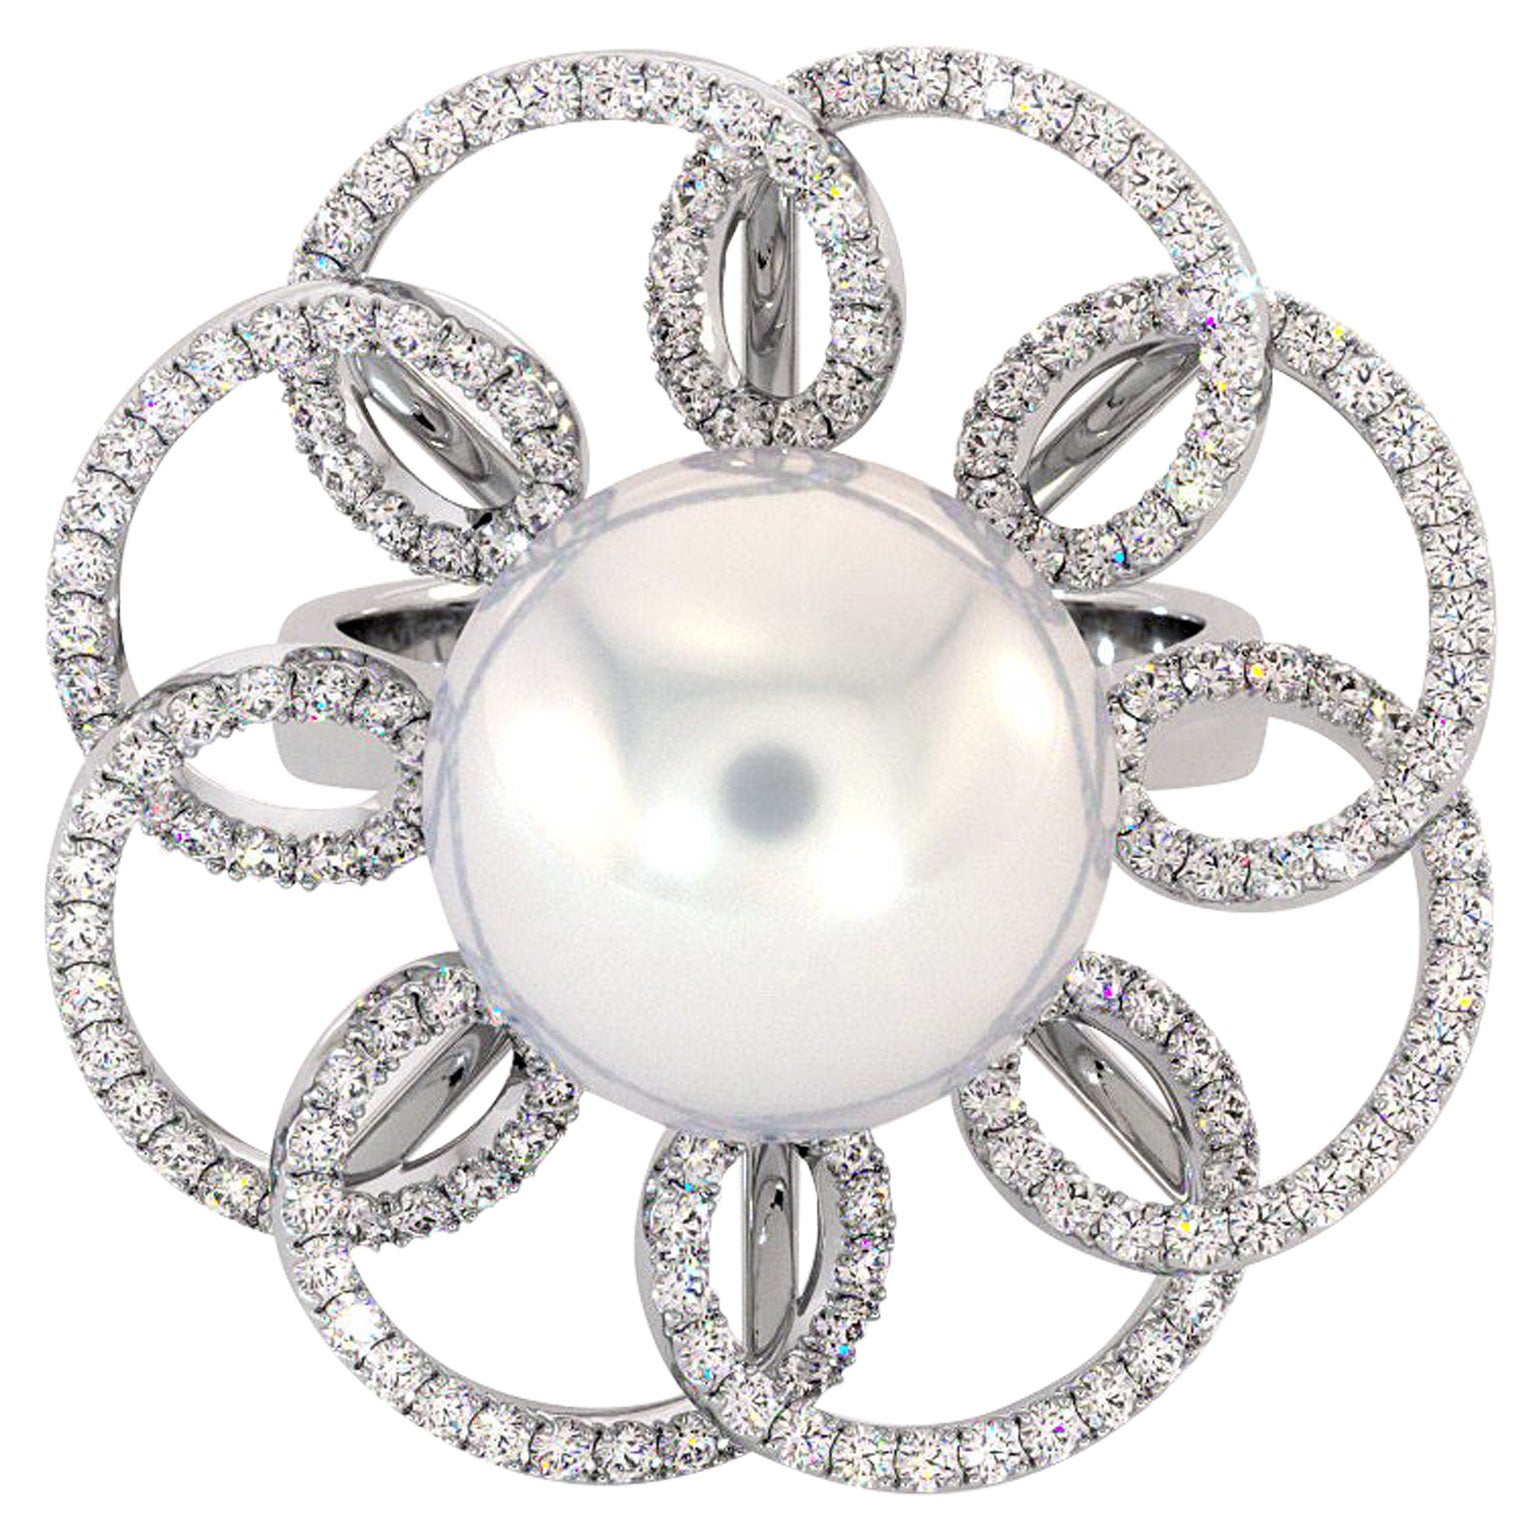 For Sale:  18K White Gold White South Sea Pearl Diamonds Ring by Emilia Lekarrier Certified